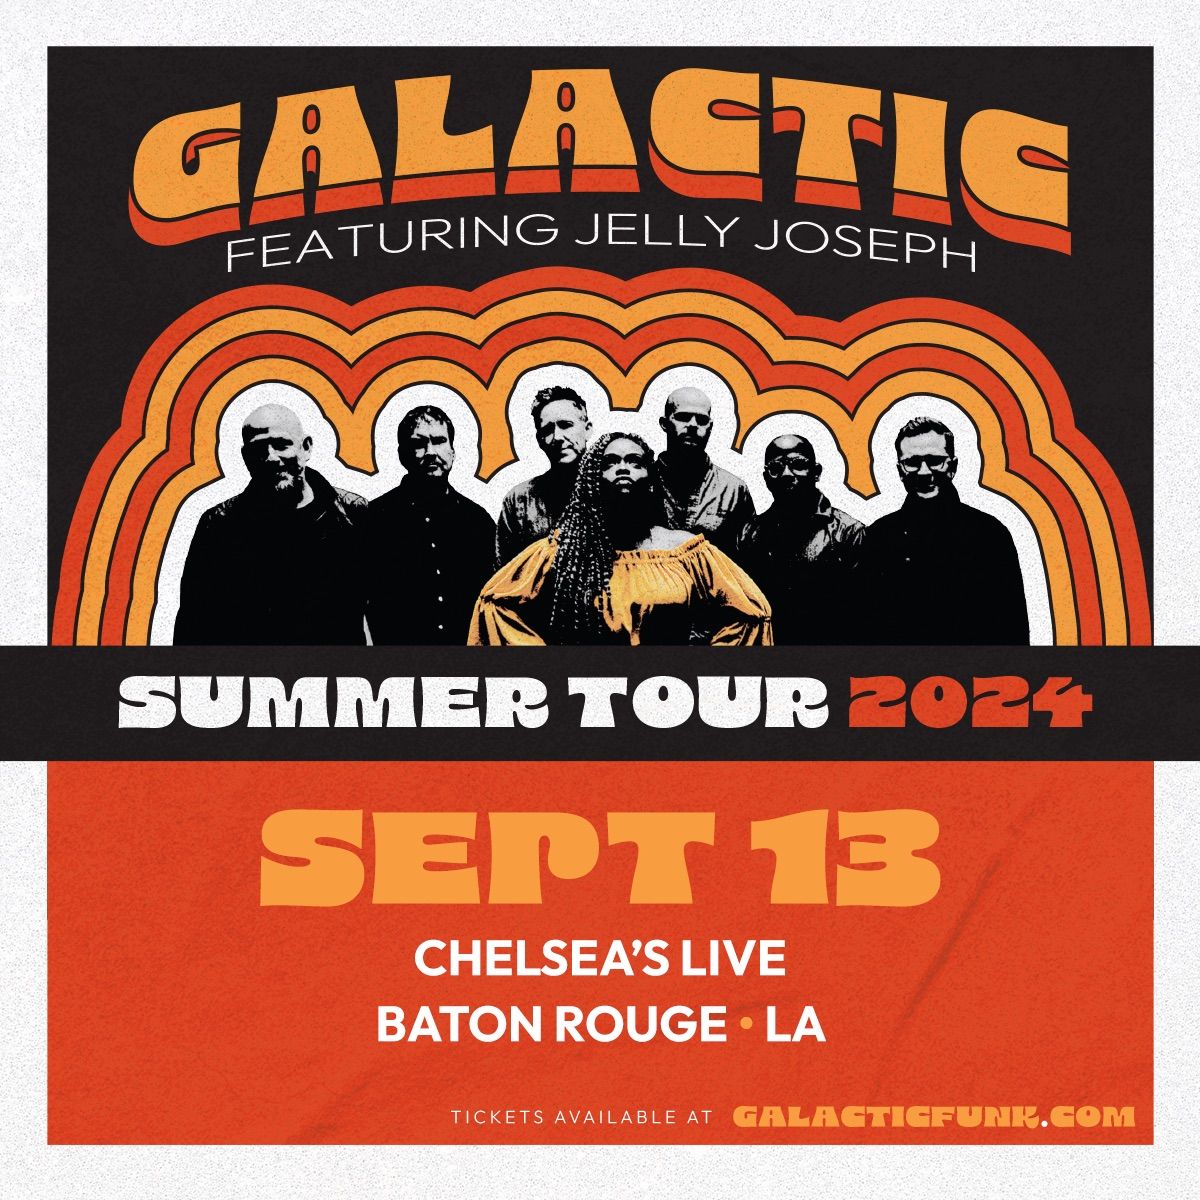 Galactic featuring Jelly Joseph at Chelsea\u2019s Live